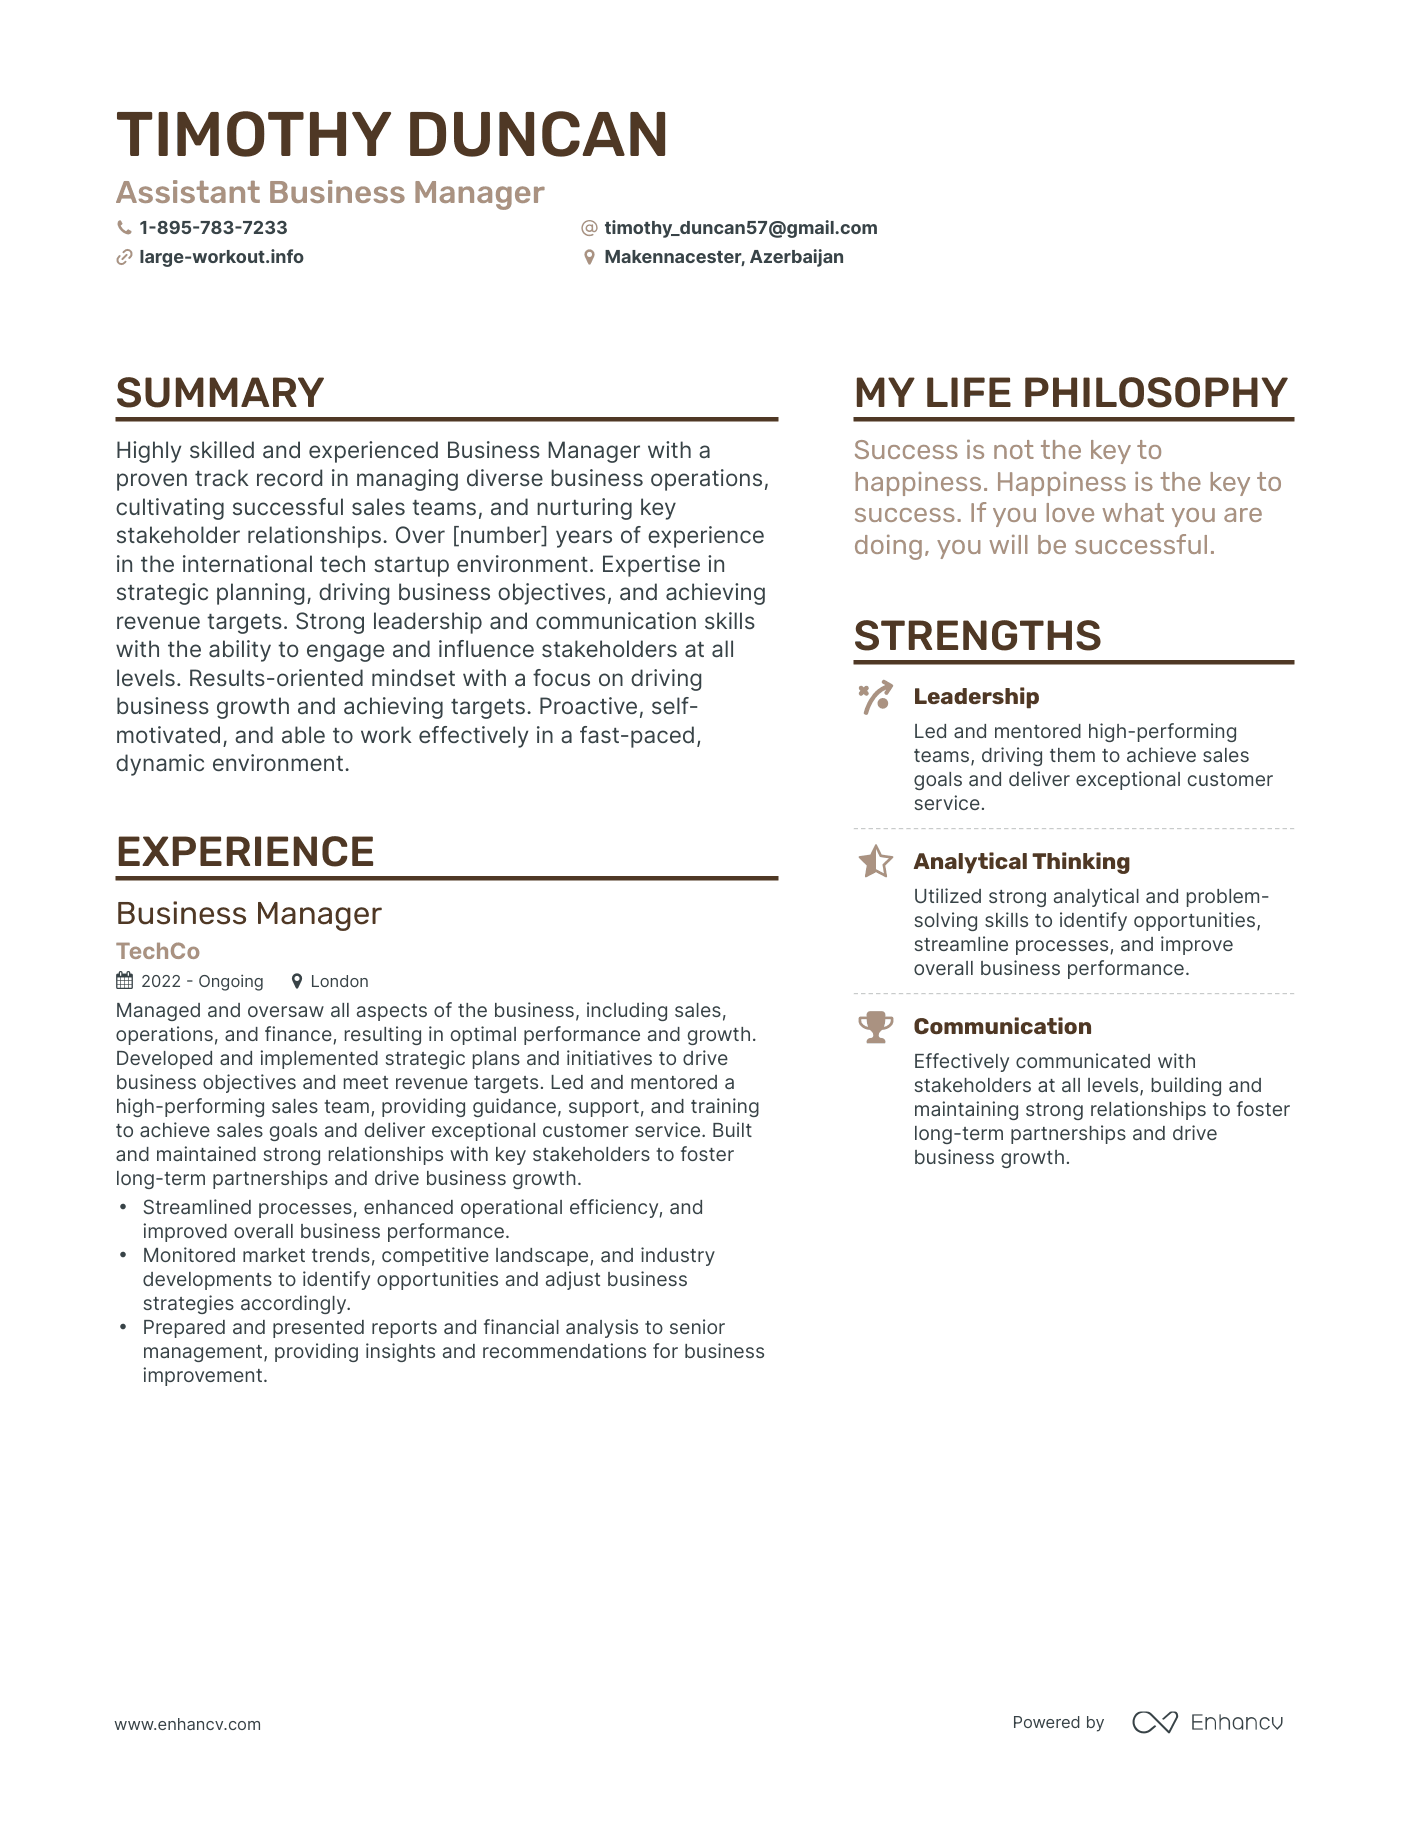 Assistant Business Manager resume example